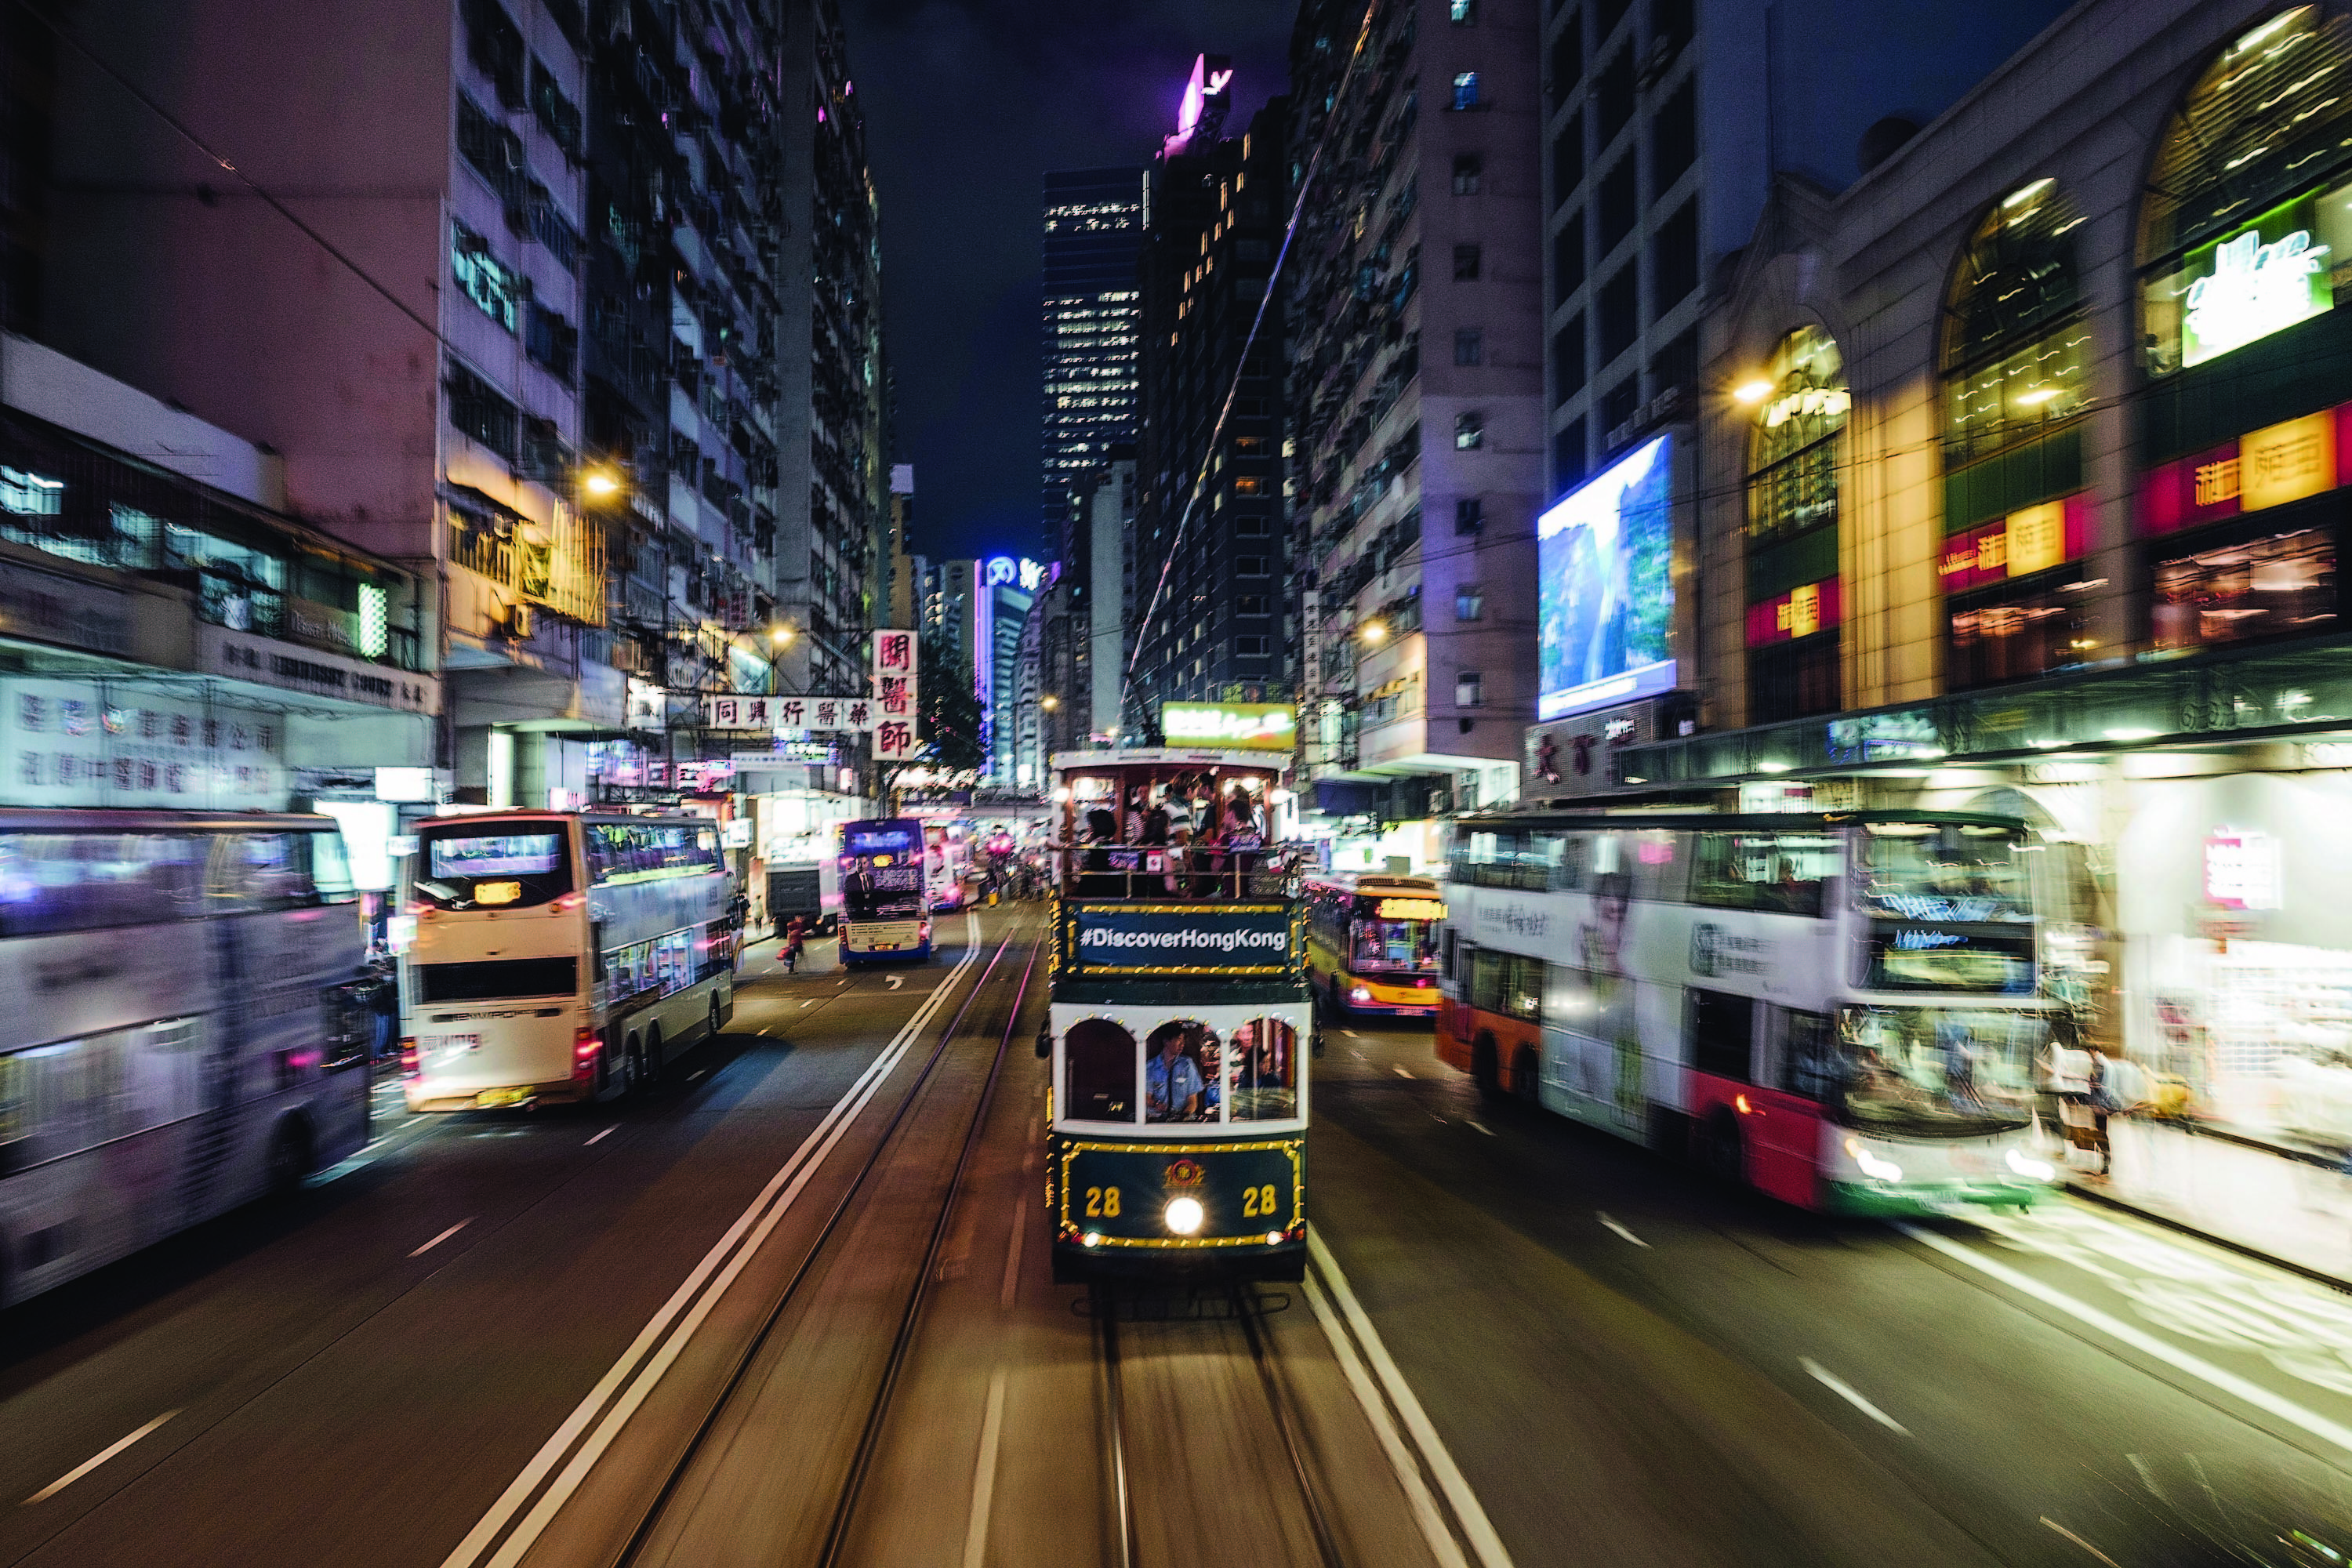 City street scene with a tram and buses, illuminated advertisements on buildings, and a #DiscoverHongKong banner